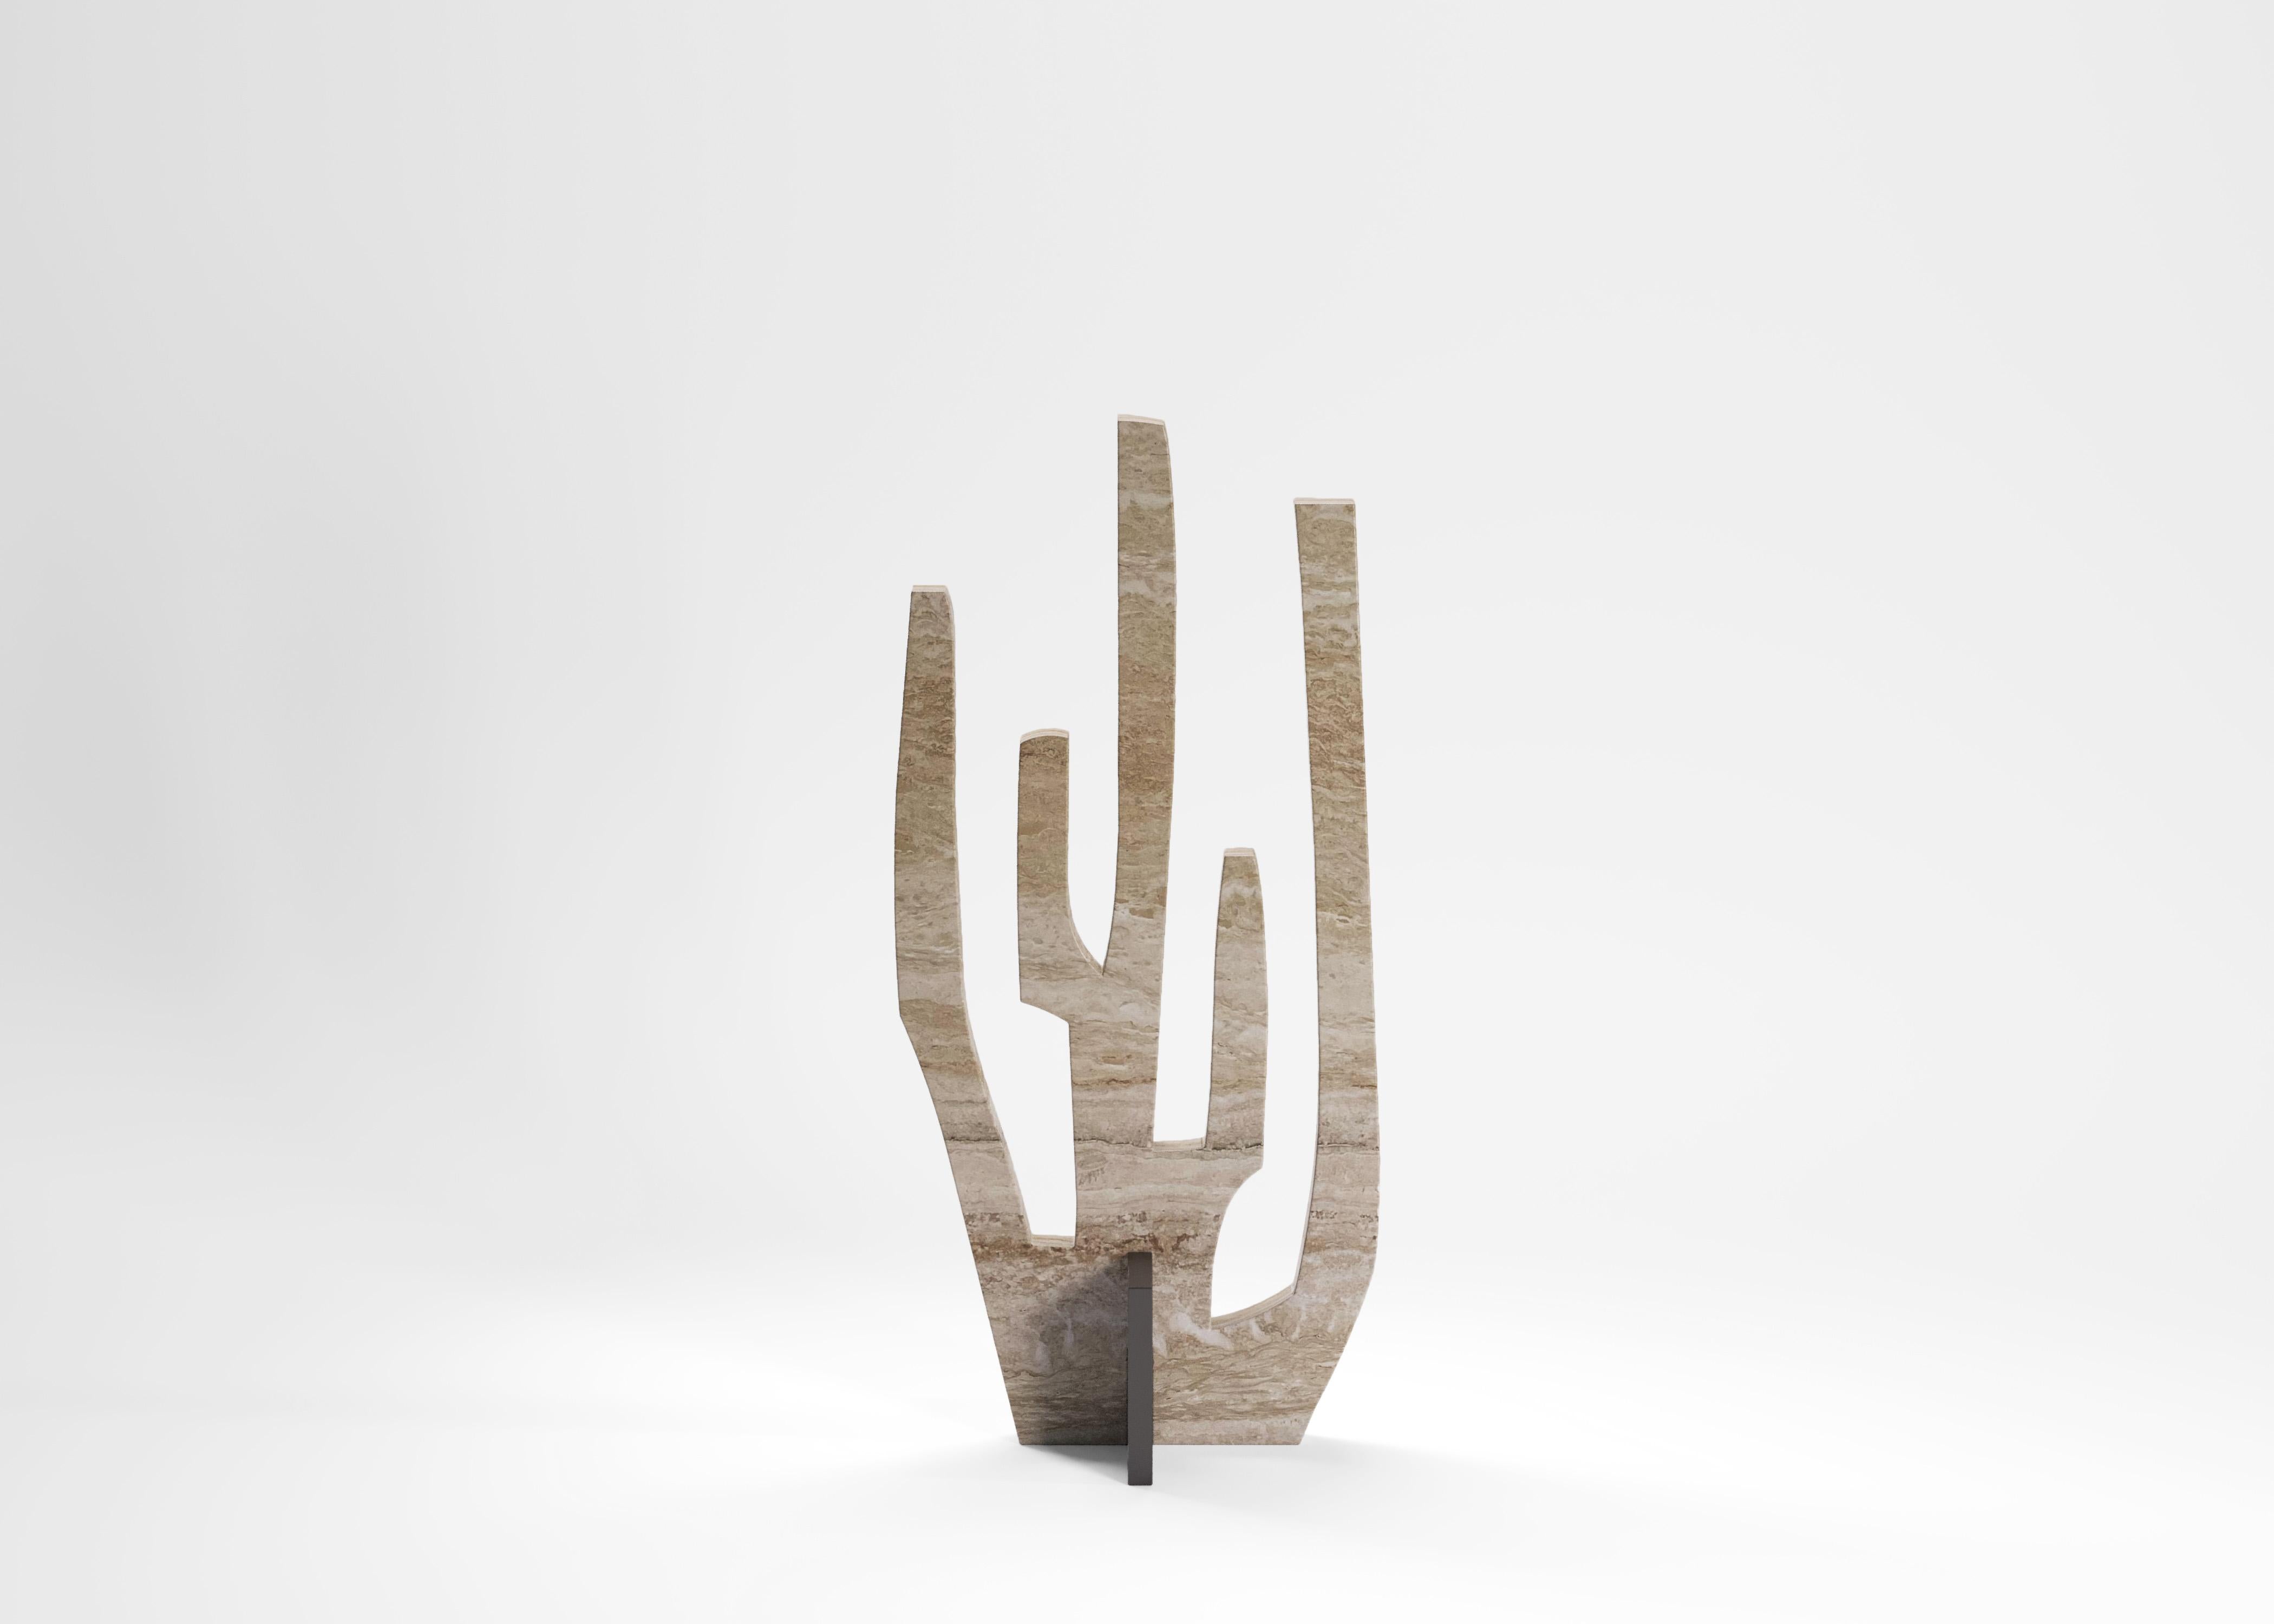 Coral sculpture by Edizione Limitata
Limited Edition of 150 pieces. Signed and numbered.
Designers: Simone Fanciullacci 
Dimensions: H 42 × W 12 × L 20 cm
Materials: Travertine, metal

Edizione Limitata, that is to say “Limited Edition”, is a brand